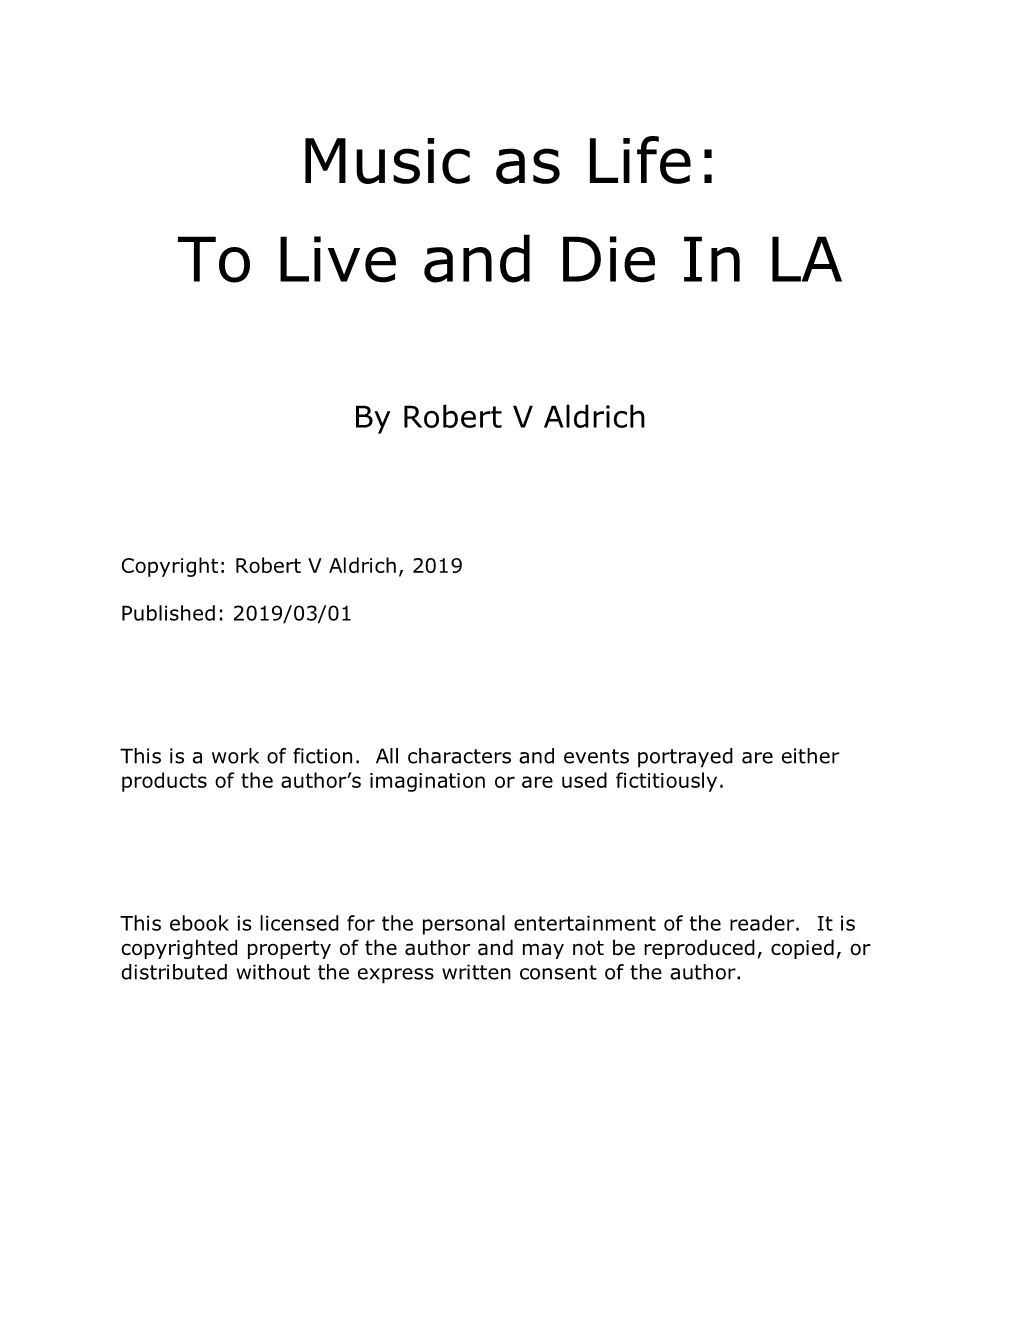 Music As Life: to Live and Die in LA